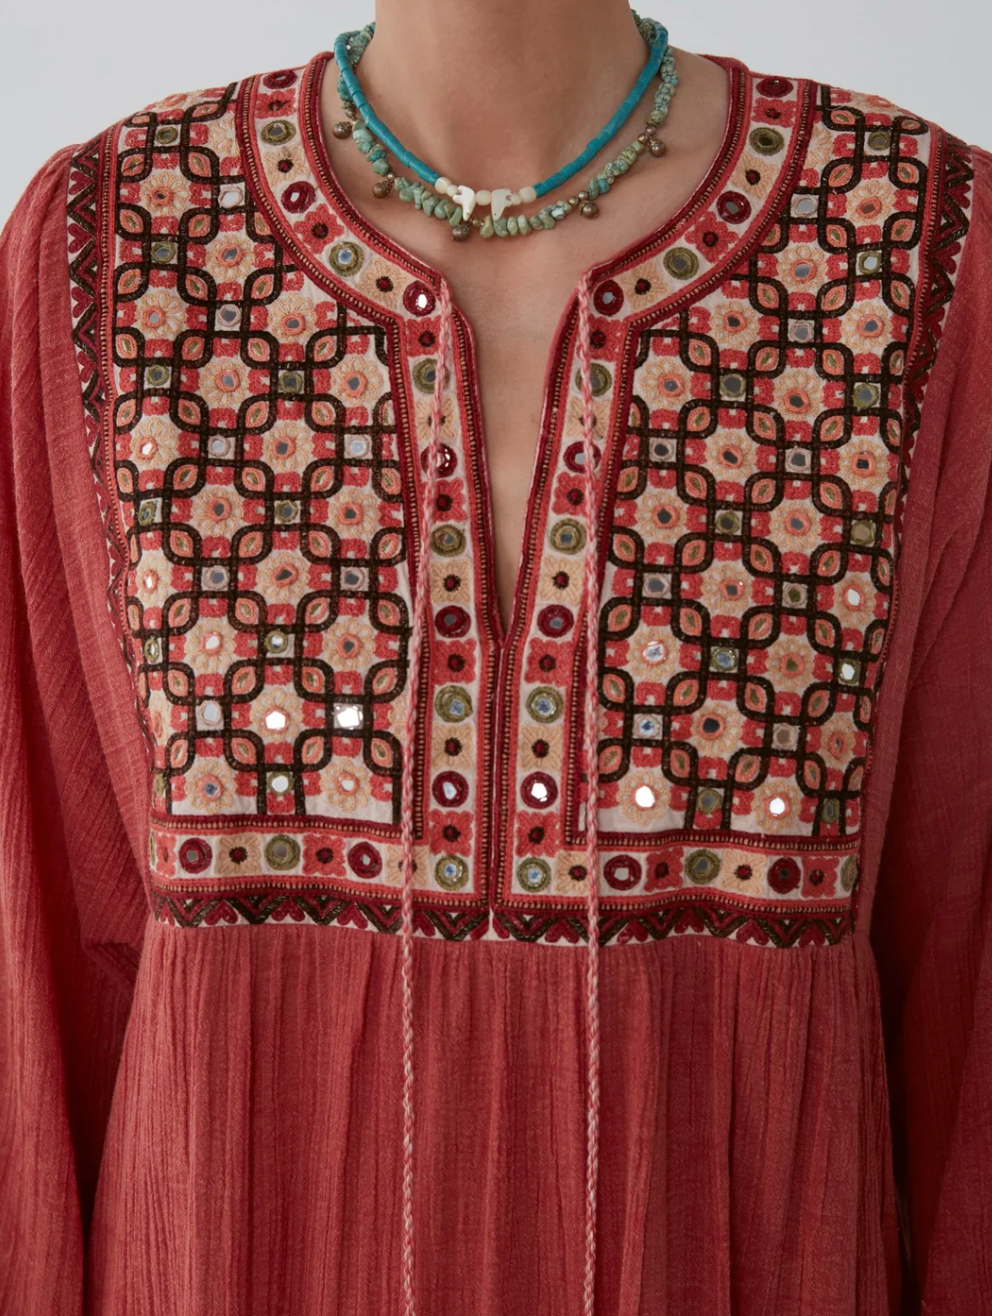 Pallenberg Dress - Paphos Chilly Red